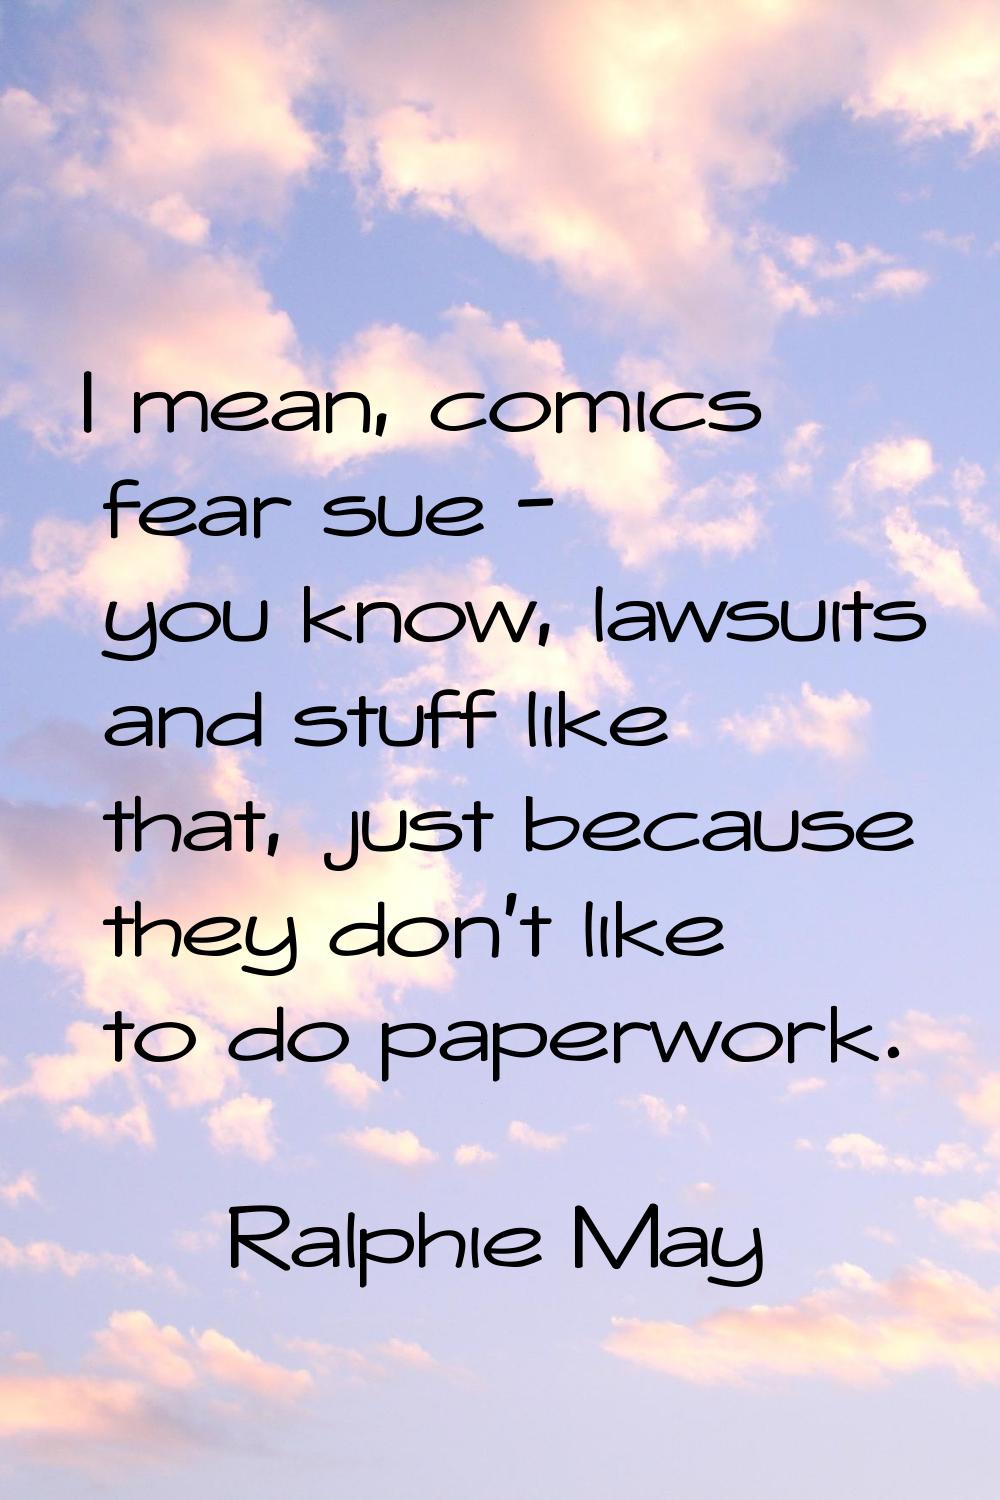 I mean, comics fear sue - you know, lawsuits and stuff like that, just because they don't like to d